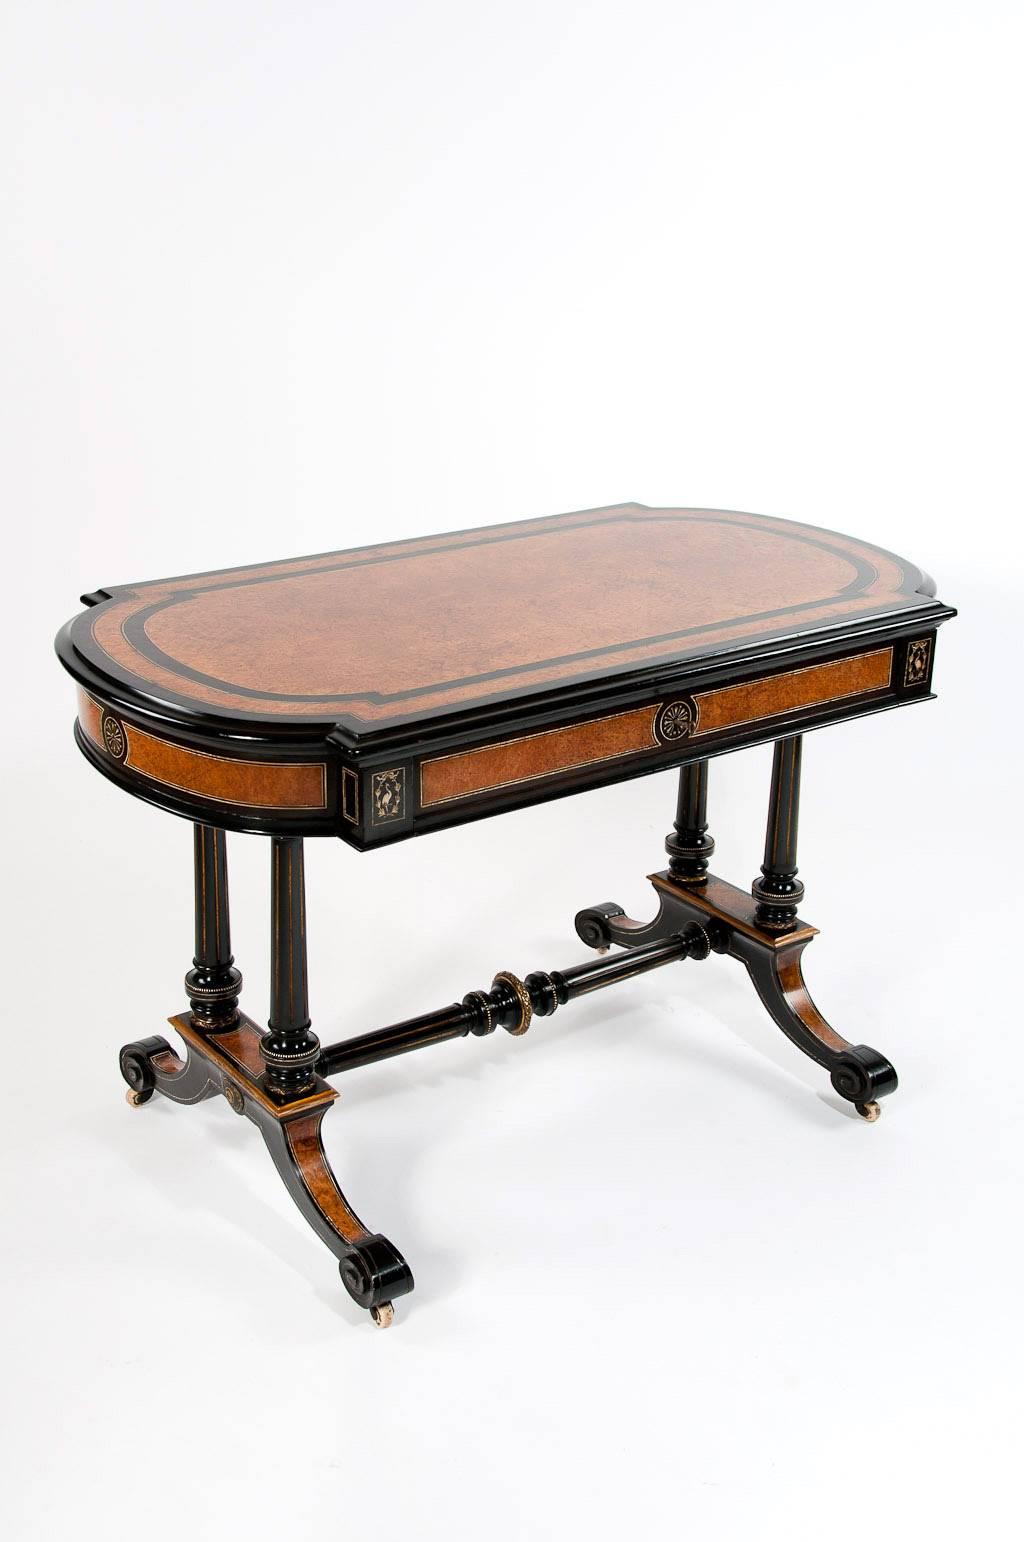 A superb quality mid-19th century library stretcher table in ebony and amboyna. This lovely quality table has been constructed in the manner of Gillows of Lancaster being one of Englands best known furniture makers, often their goods were not